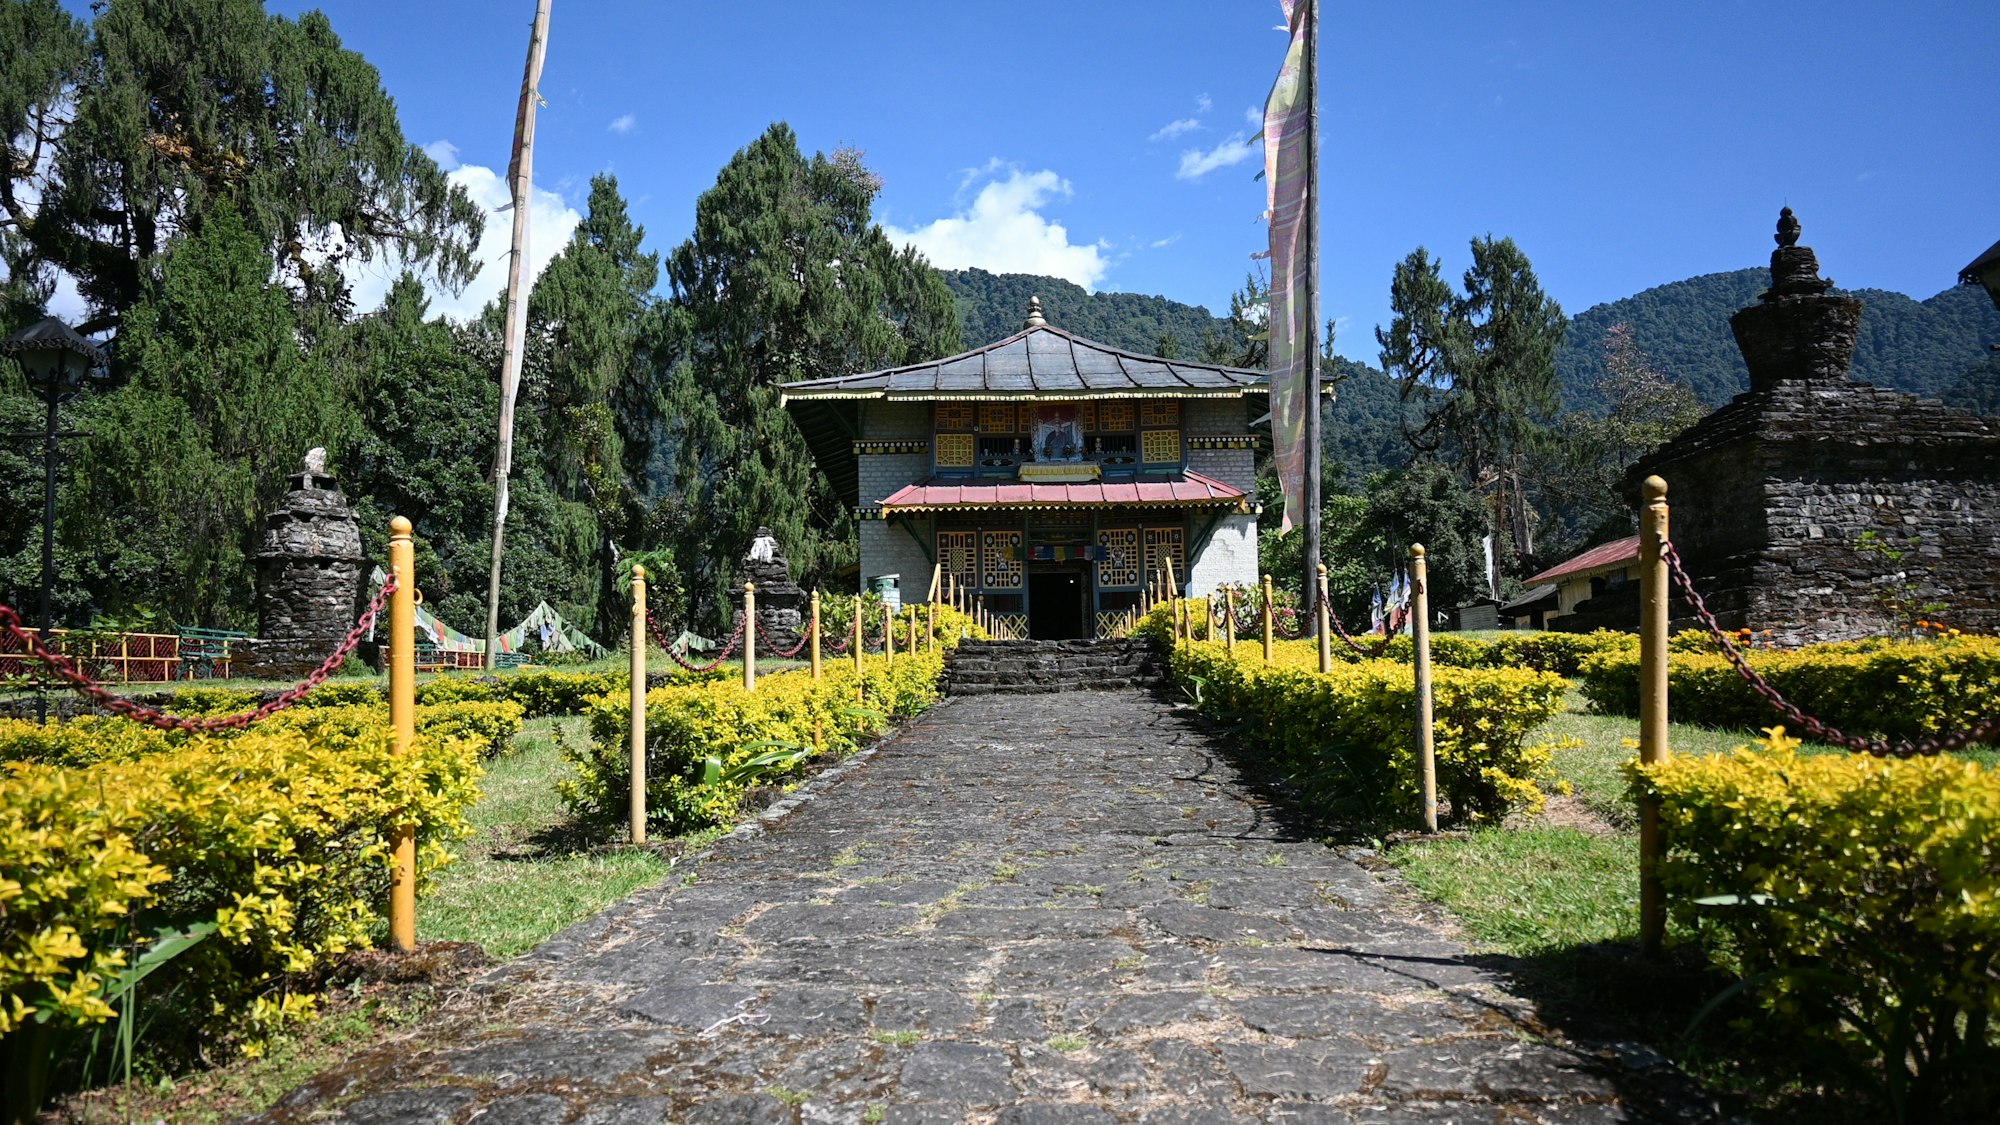 According to the Sikkim History, Dubdi Monastery was established in 1701.  Thus it makes its one of the oldest monastery in Sikkim. It is located at Yuksom West Sikkim. It is for the Nyingmapa Sect of Buddhism. It is regarded as a place of historical importance and is under the care of the Archeological Survey of India.